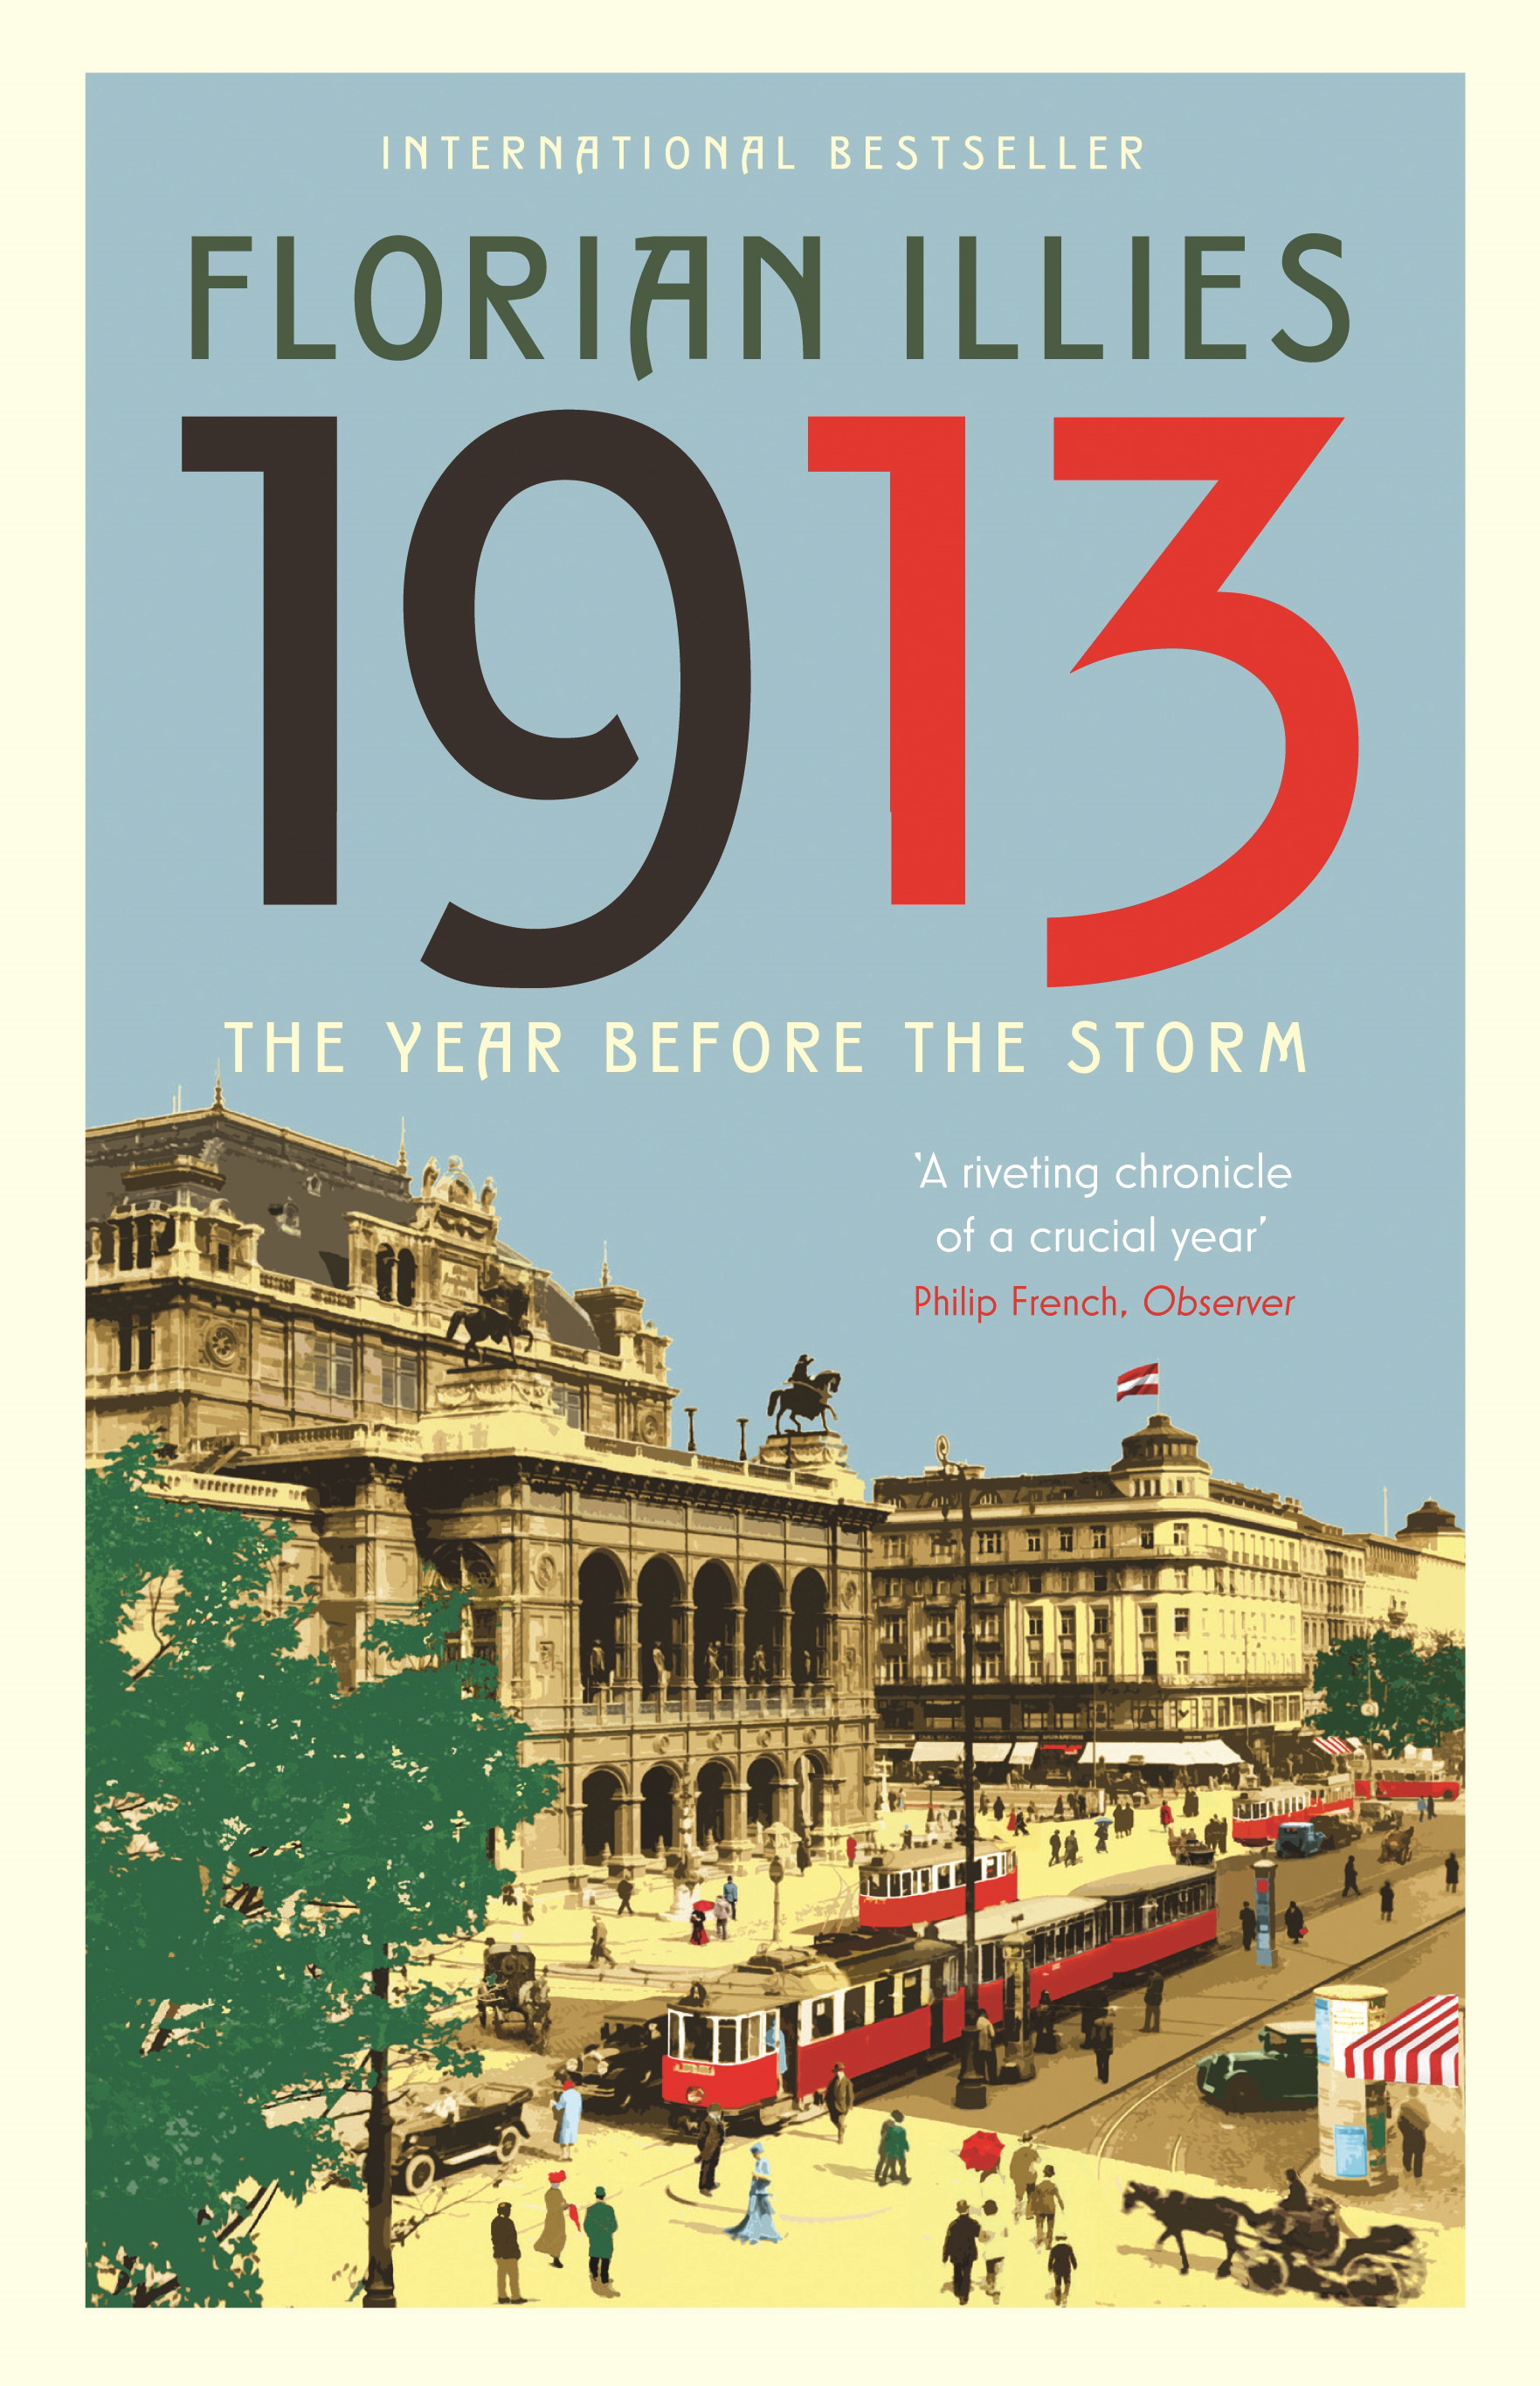 1913: The Year before the Storm